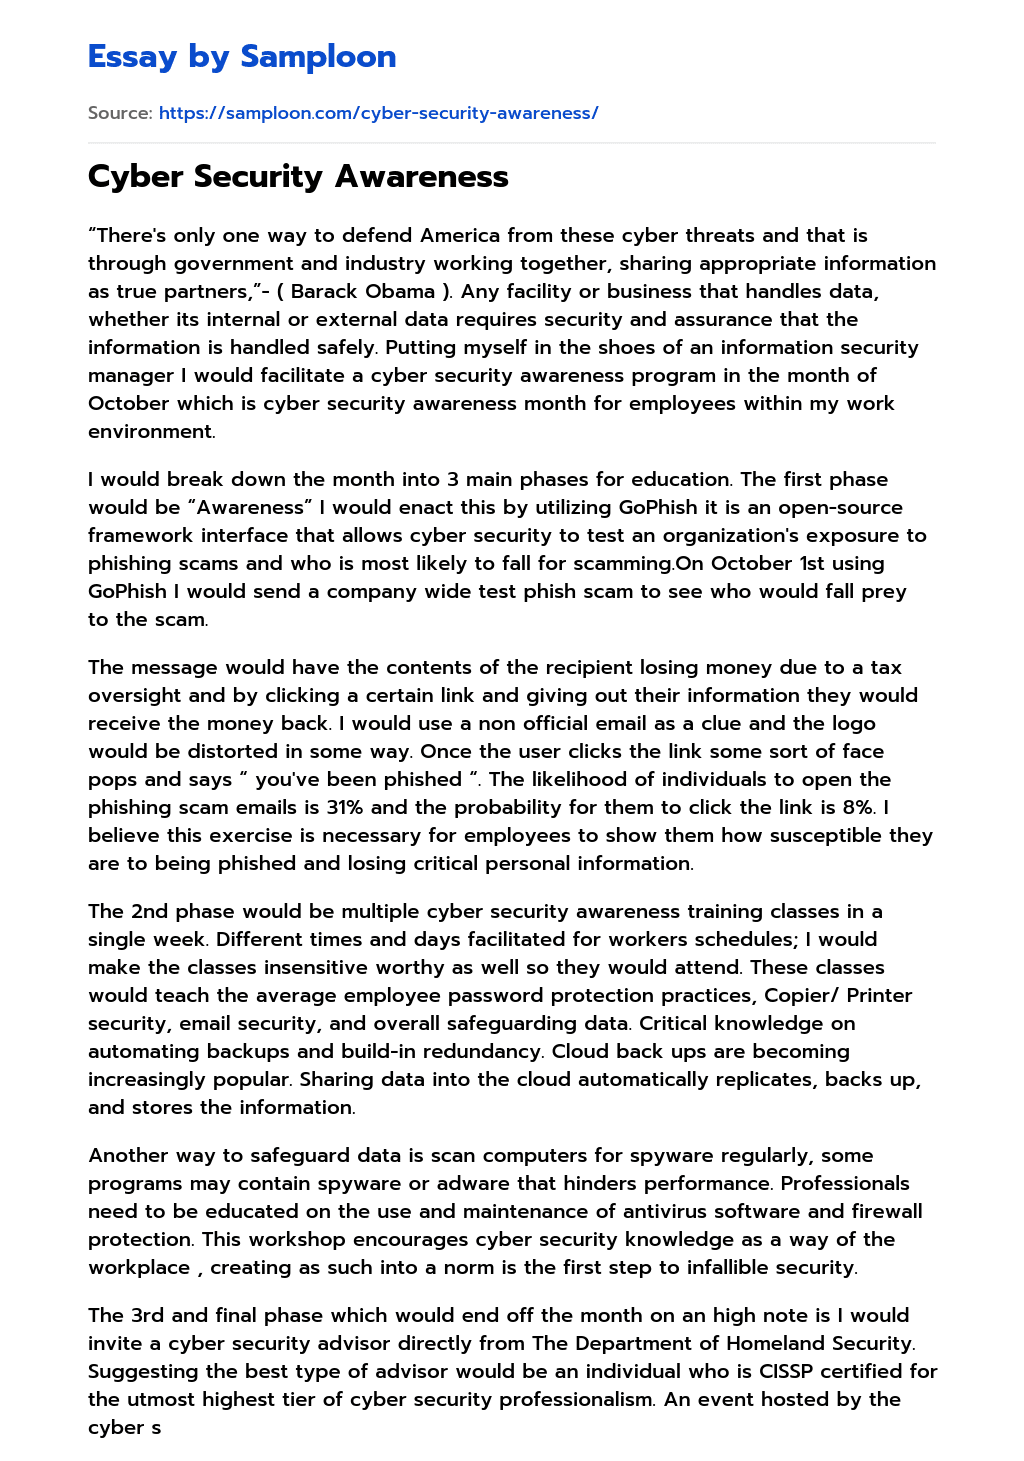 cyber security essay conclusion